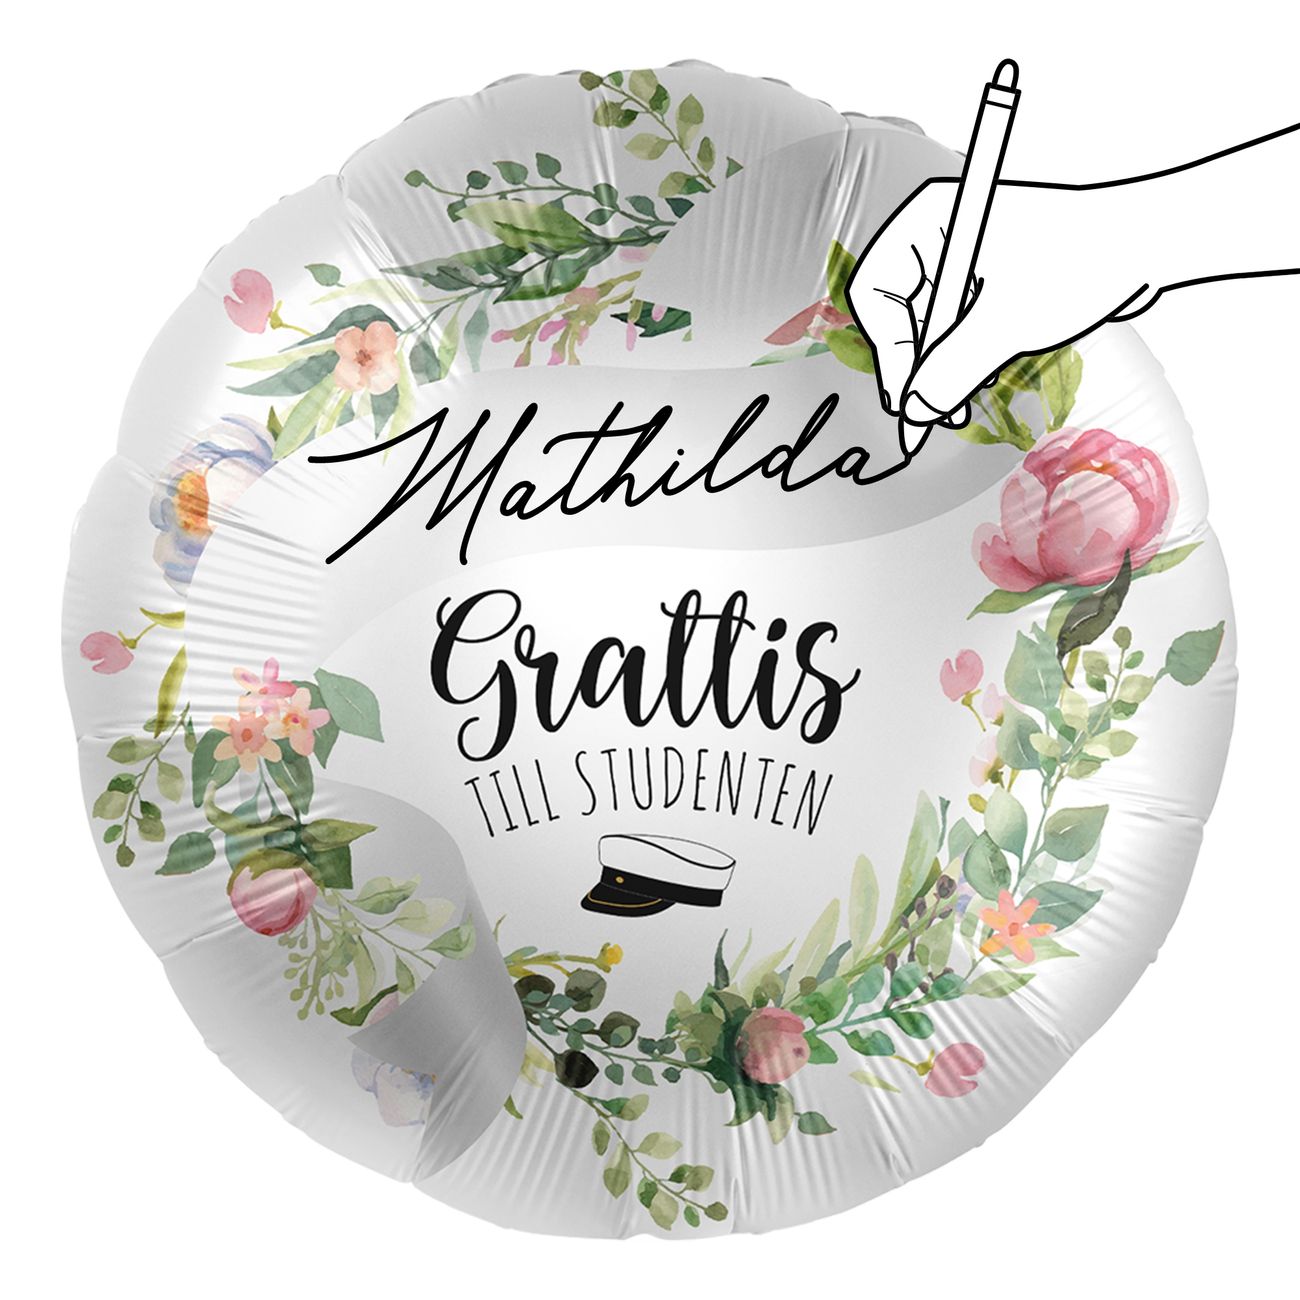 1-balloon-personalize-it-blooming-student-swe-91886-1